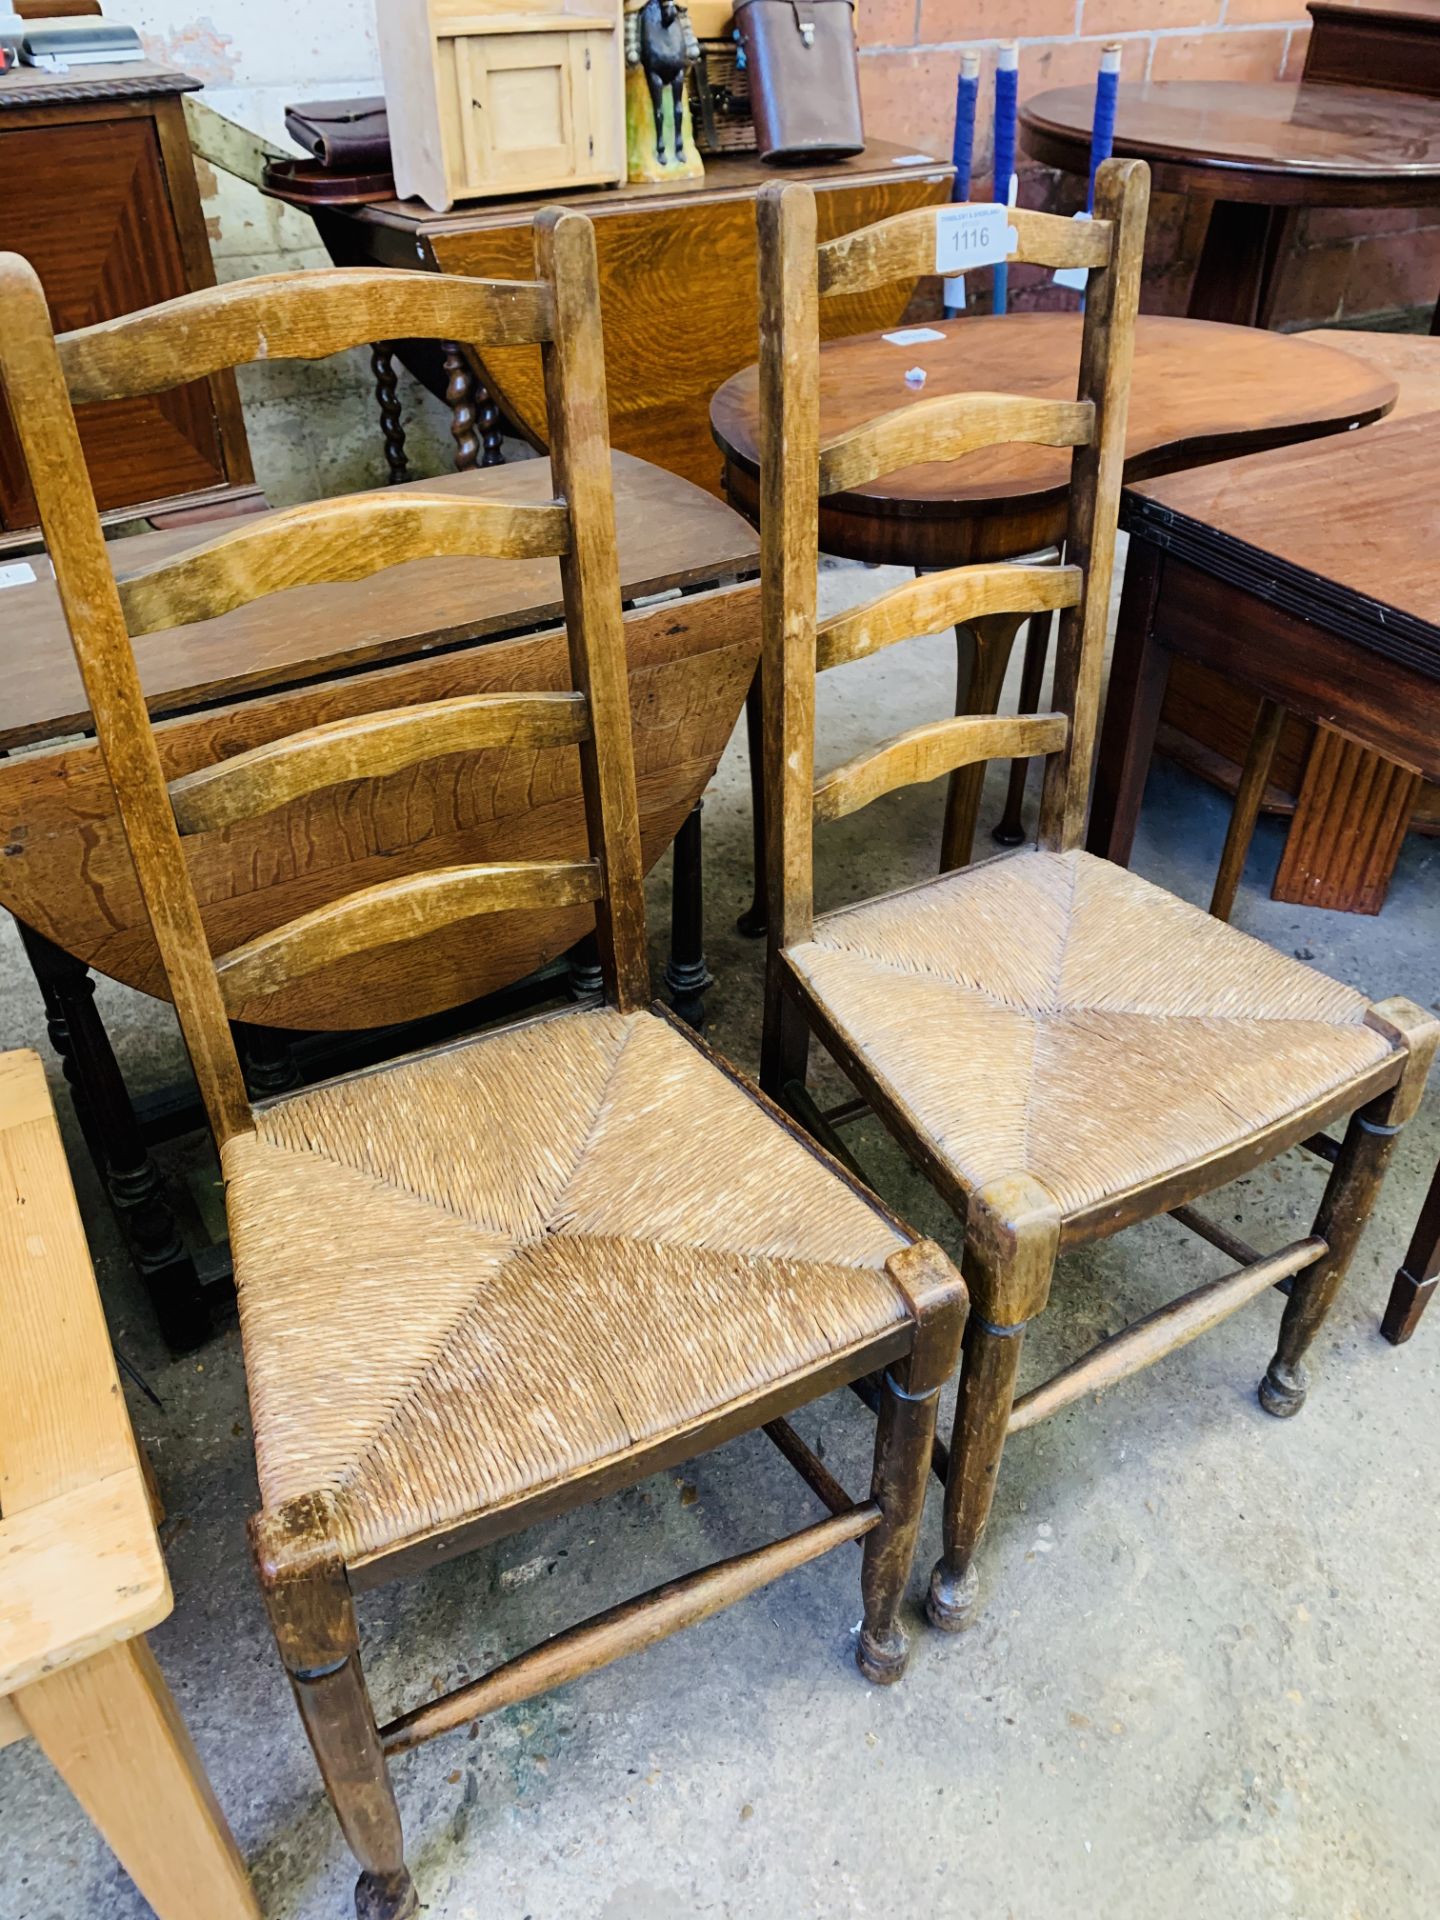 Pair of string seat ladder back chairs.